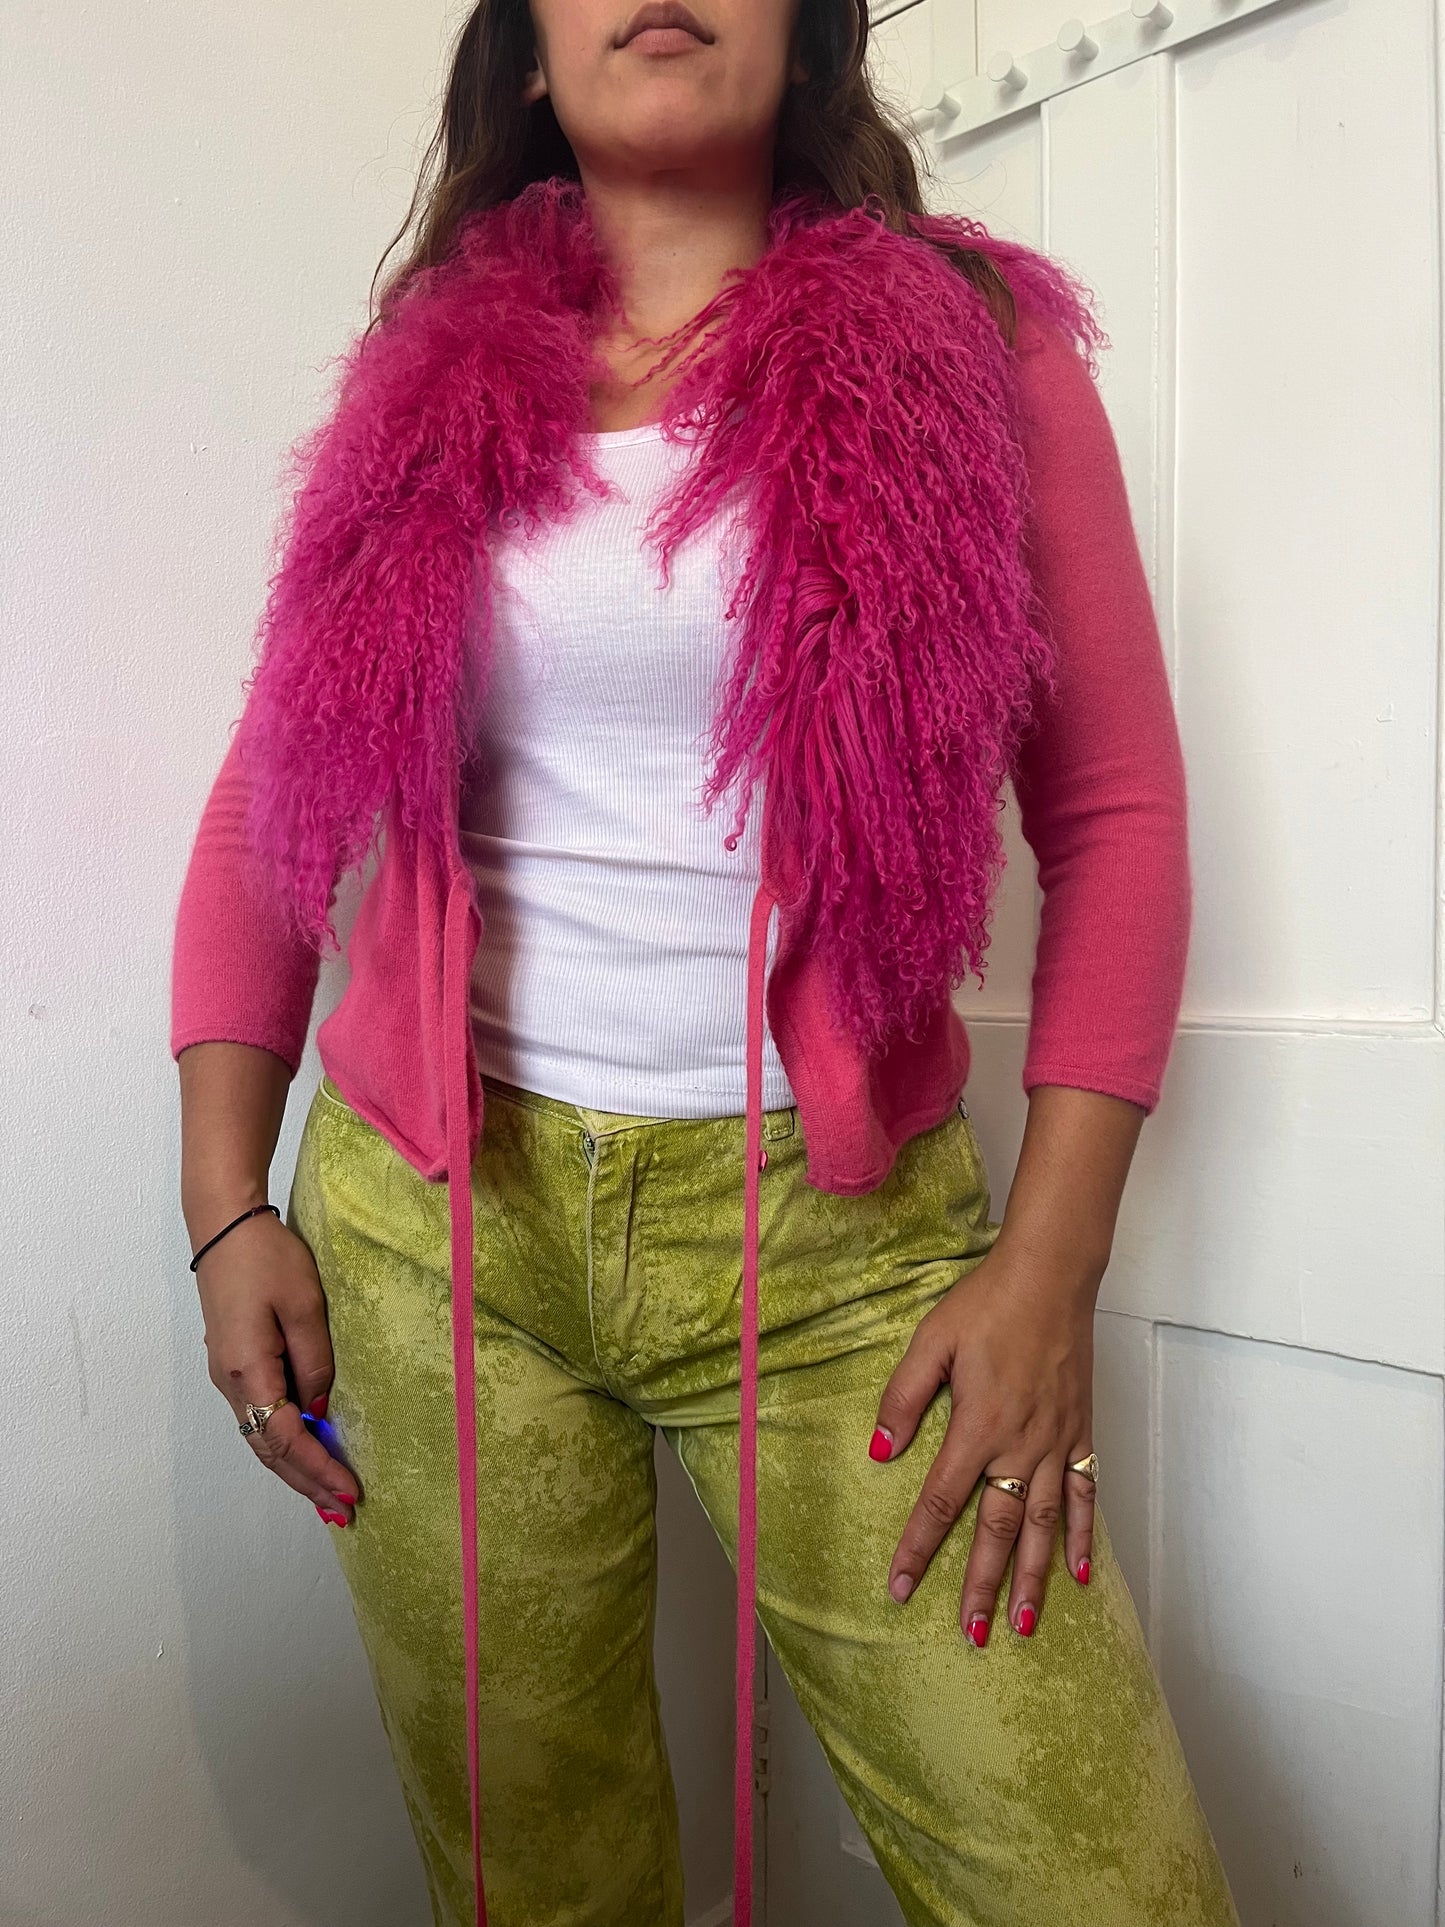 Ballet wrap hot pink fluffy cardie (S)